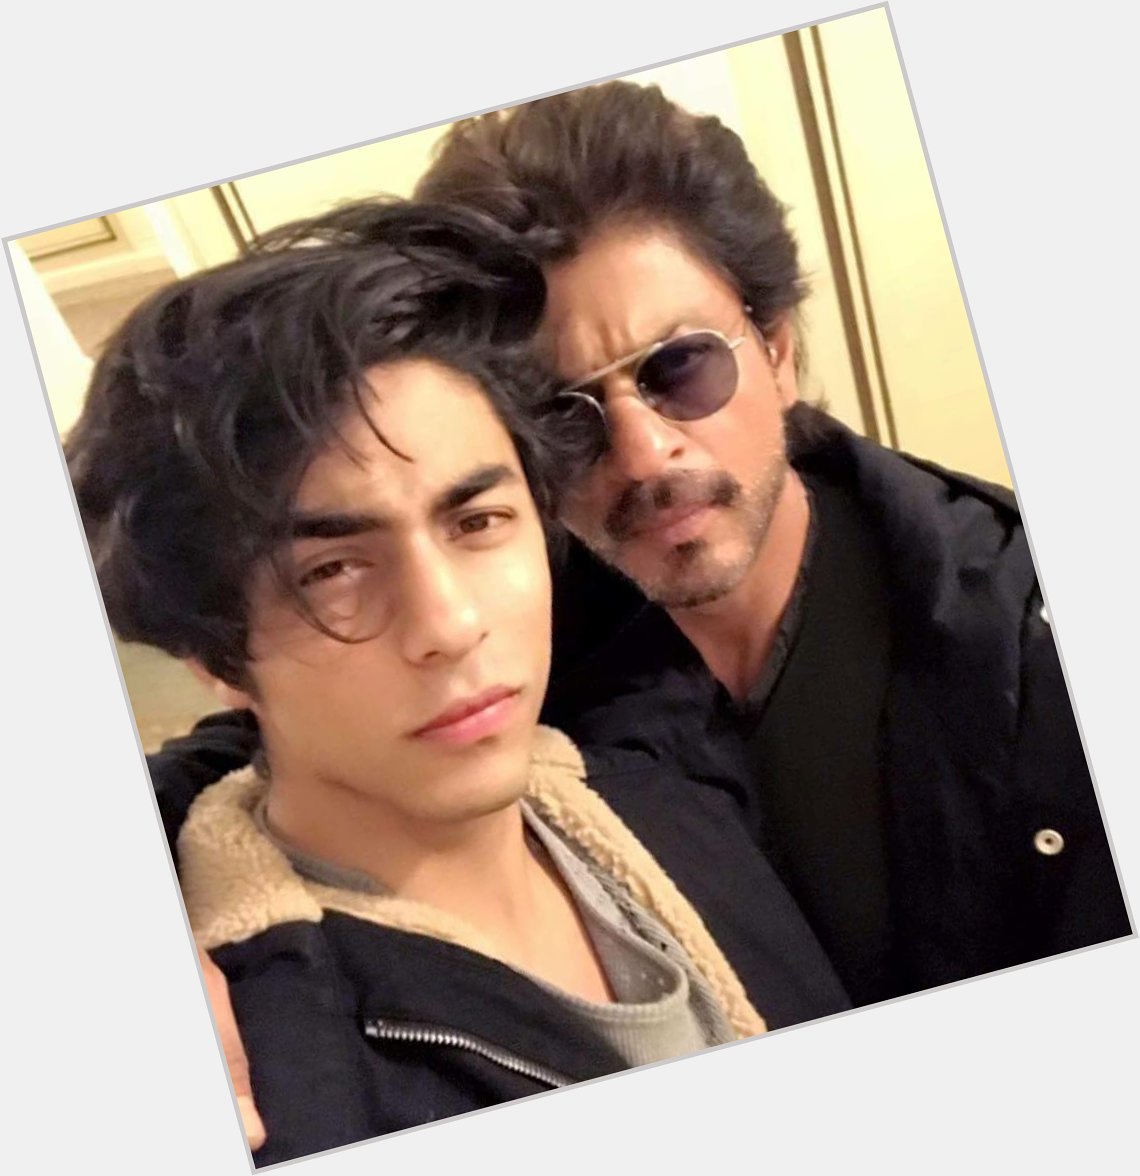 Happy birthday Aryan khan. May Allah bless u with good health, success and happiness. 